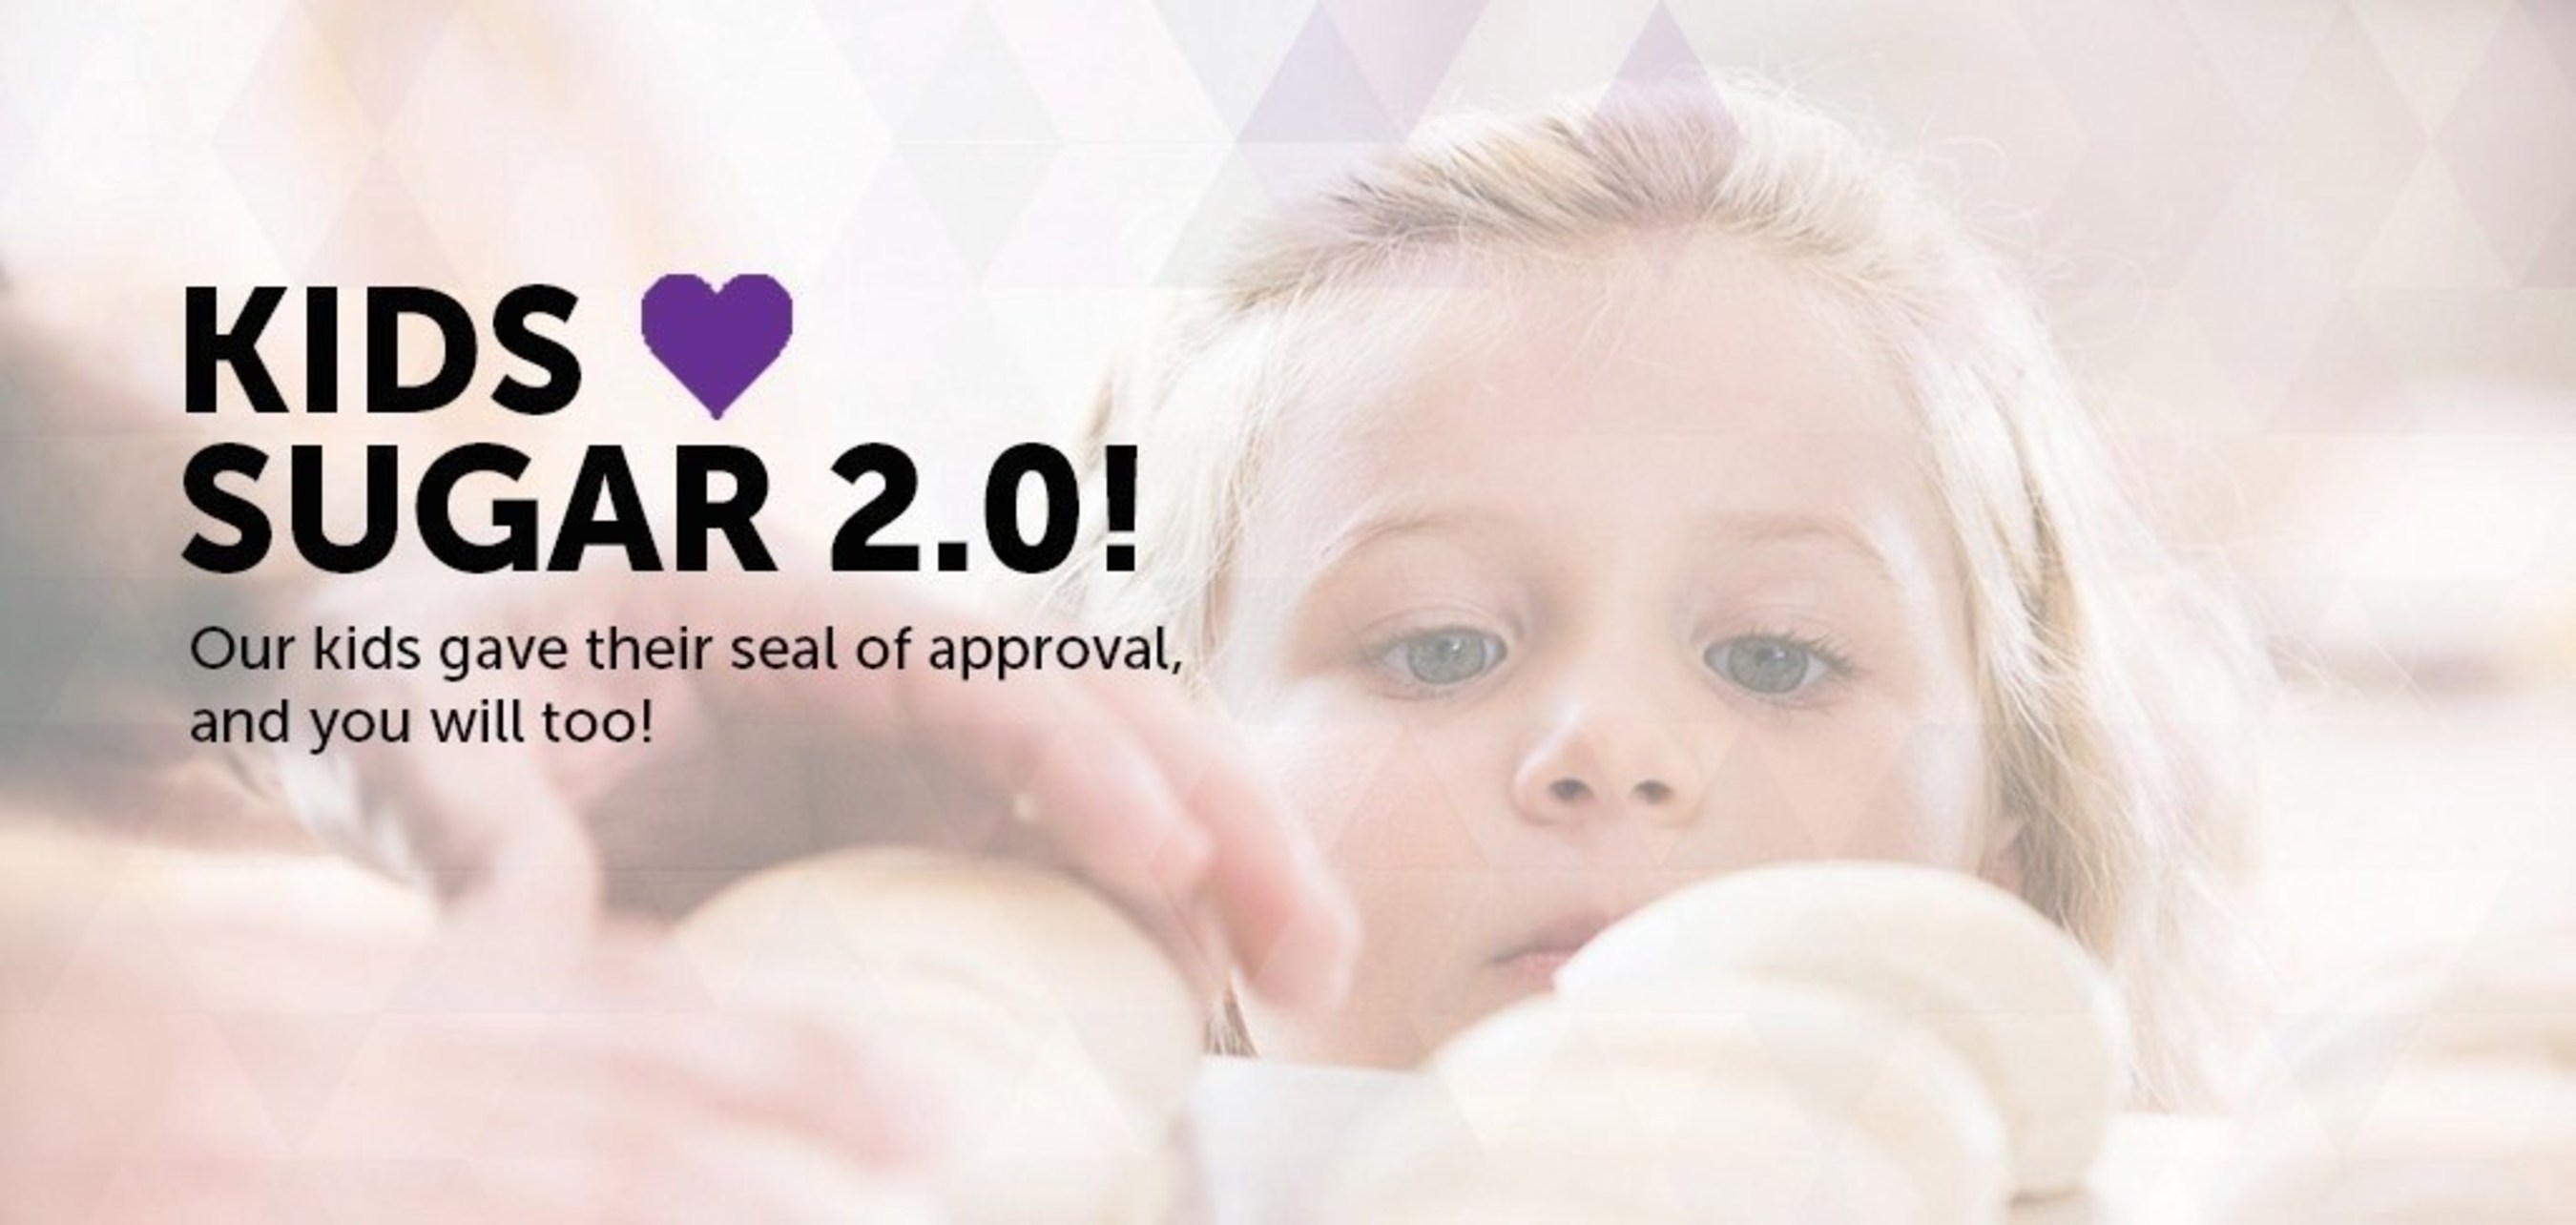 Sugar 2.0 was inspired by one dad's quest to find a healthier sugar replacement for his kids.